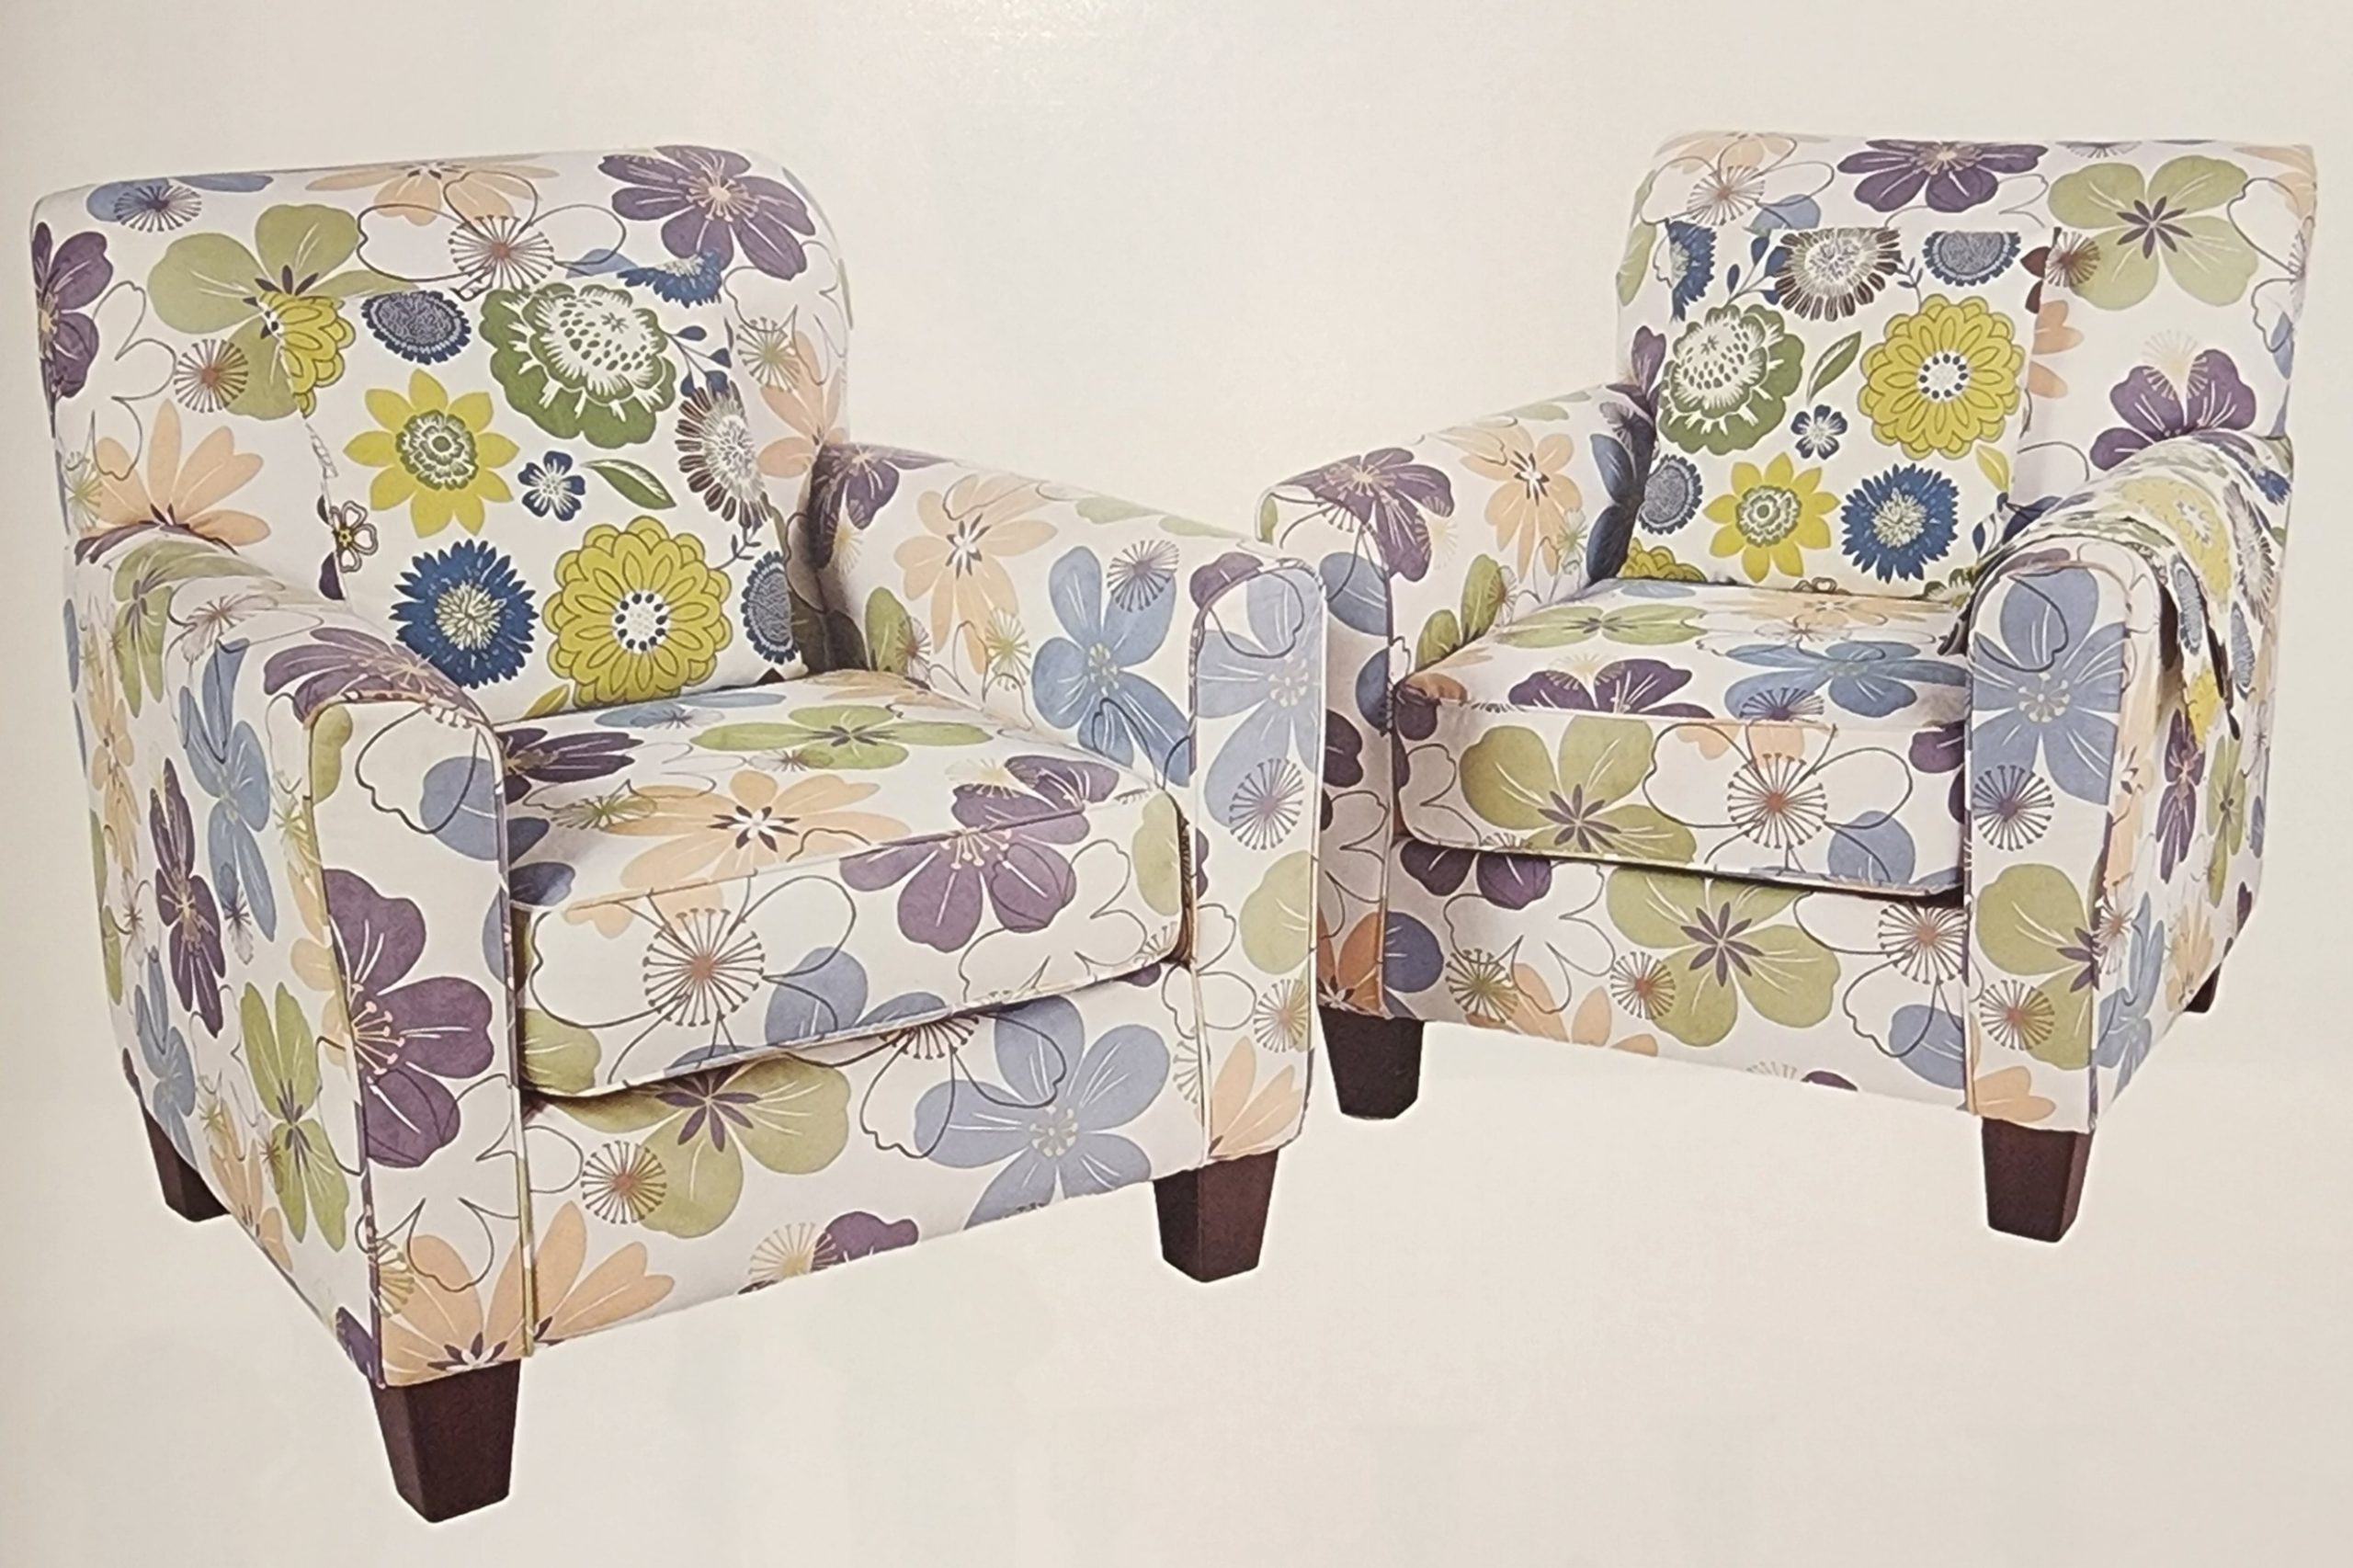 Two floral covered vintage chairs from Betty White's home